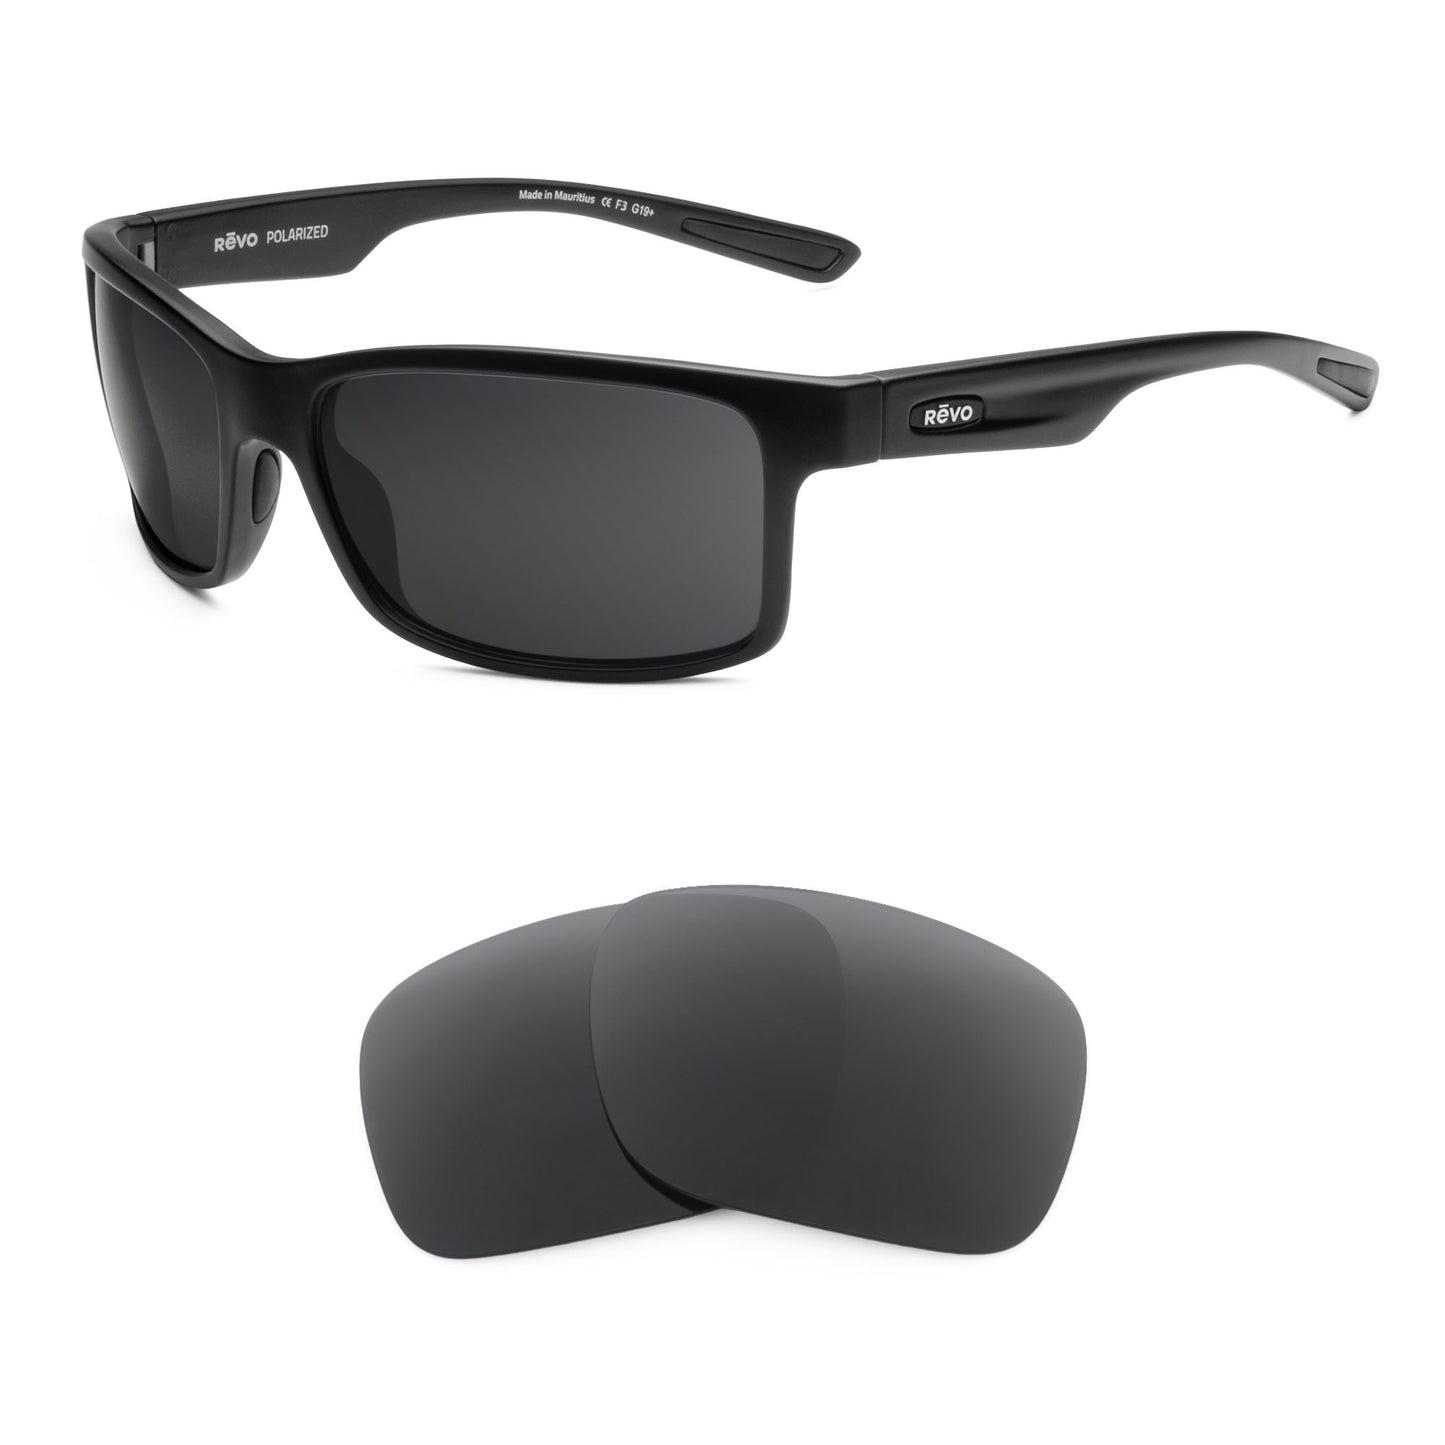 Revo Crawler XL sunglasses with replacement lenses